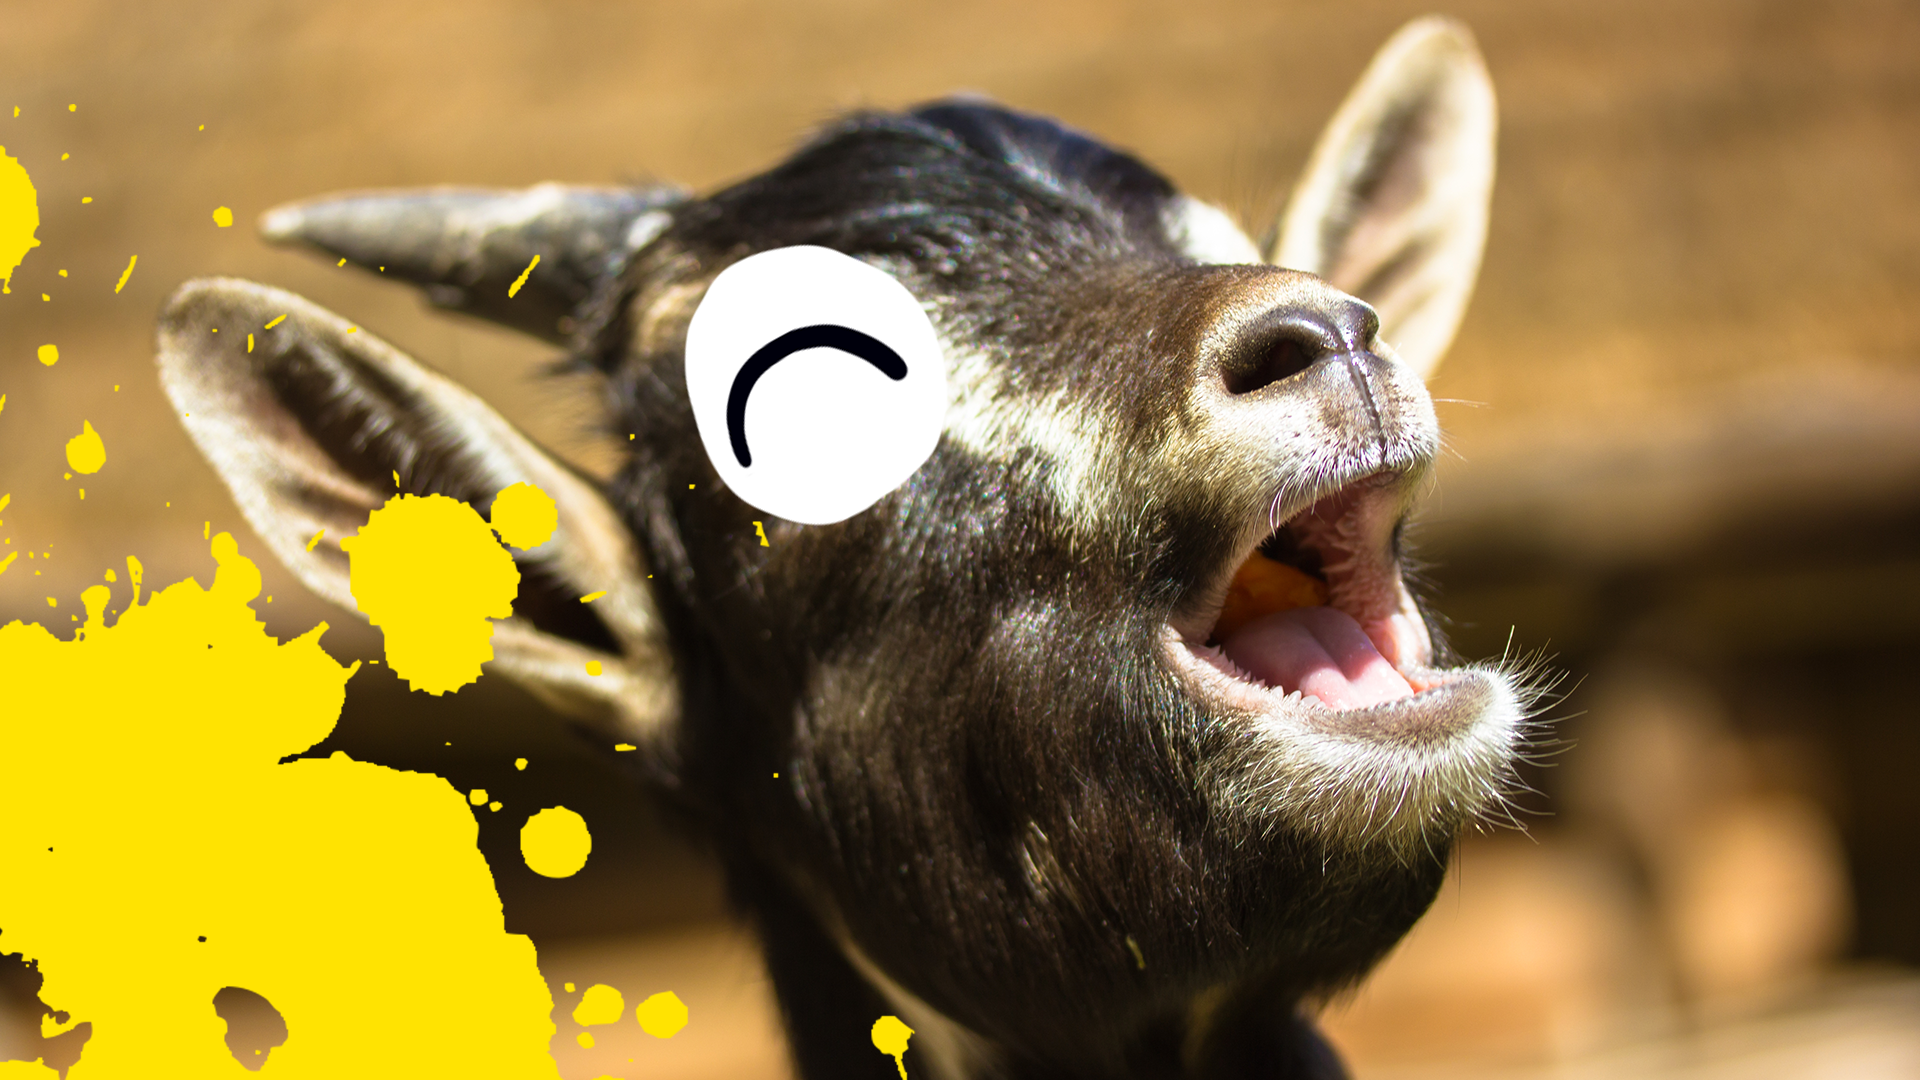 Singing goat with splats